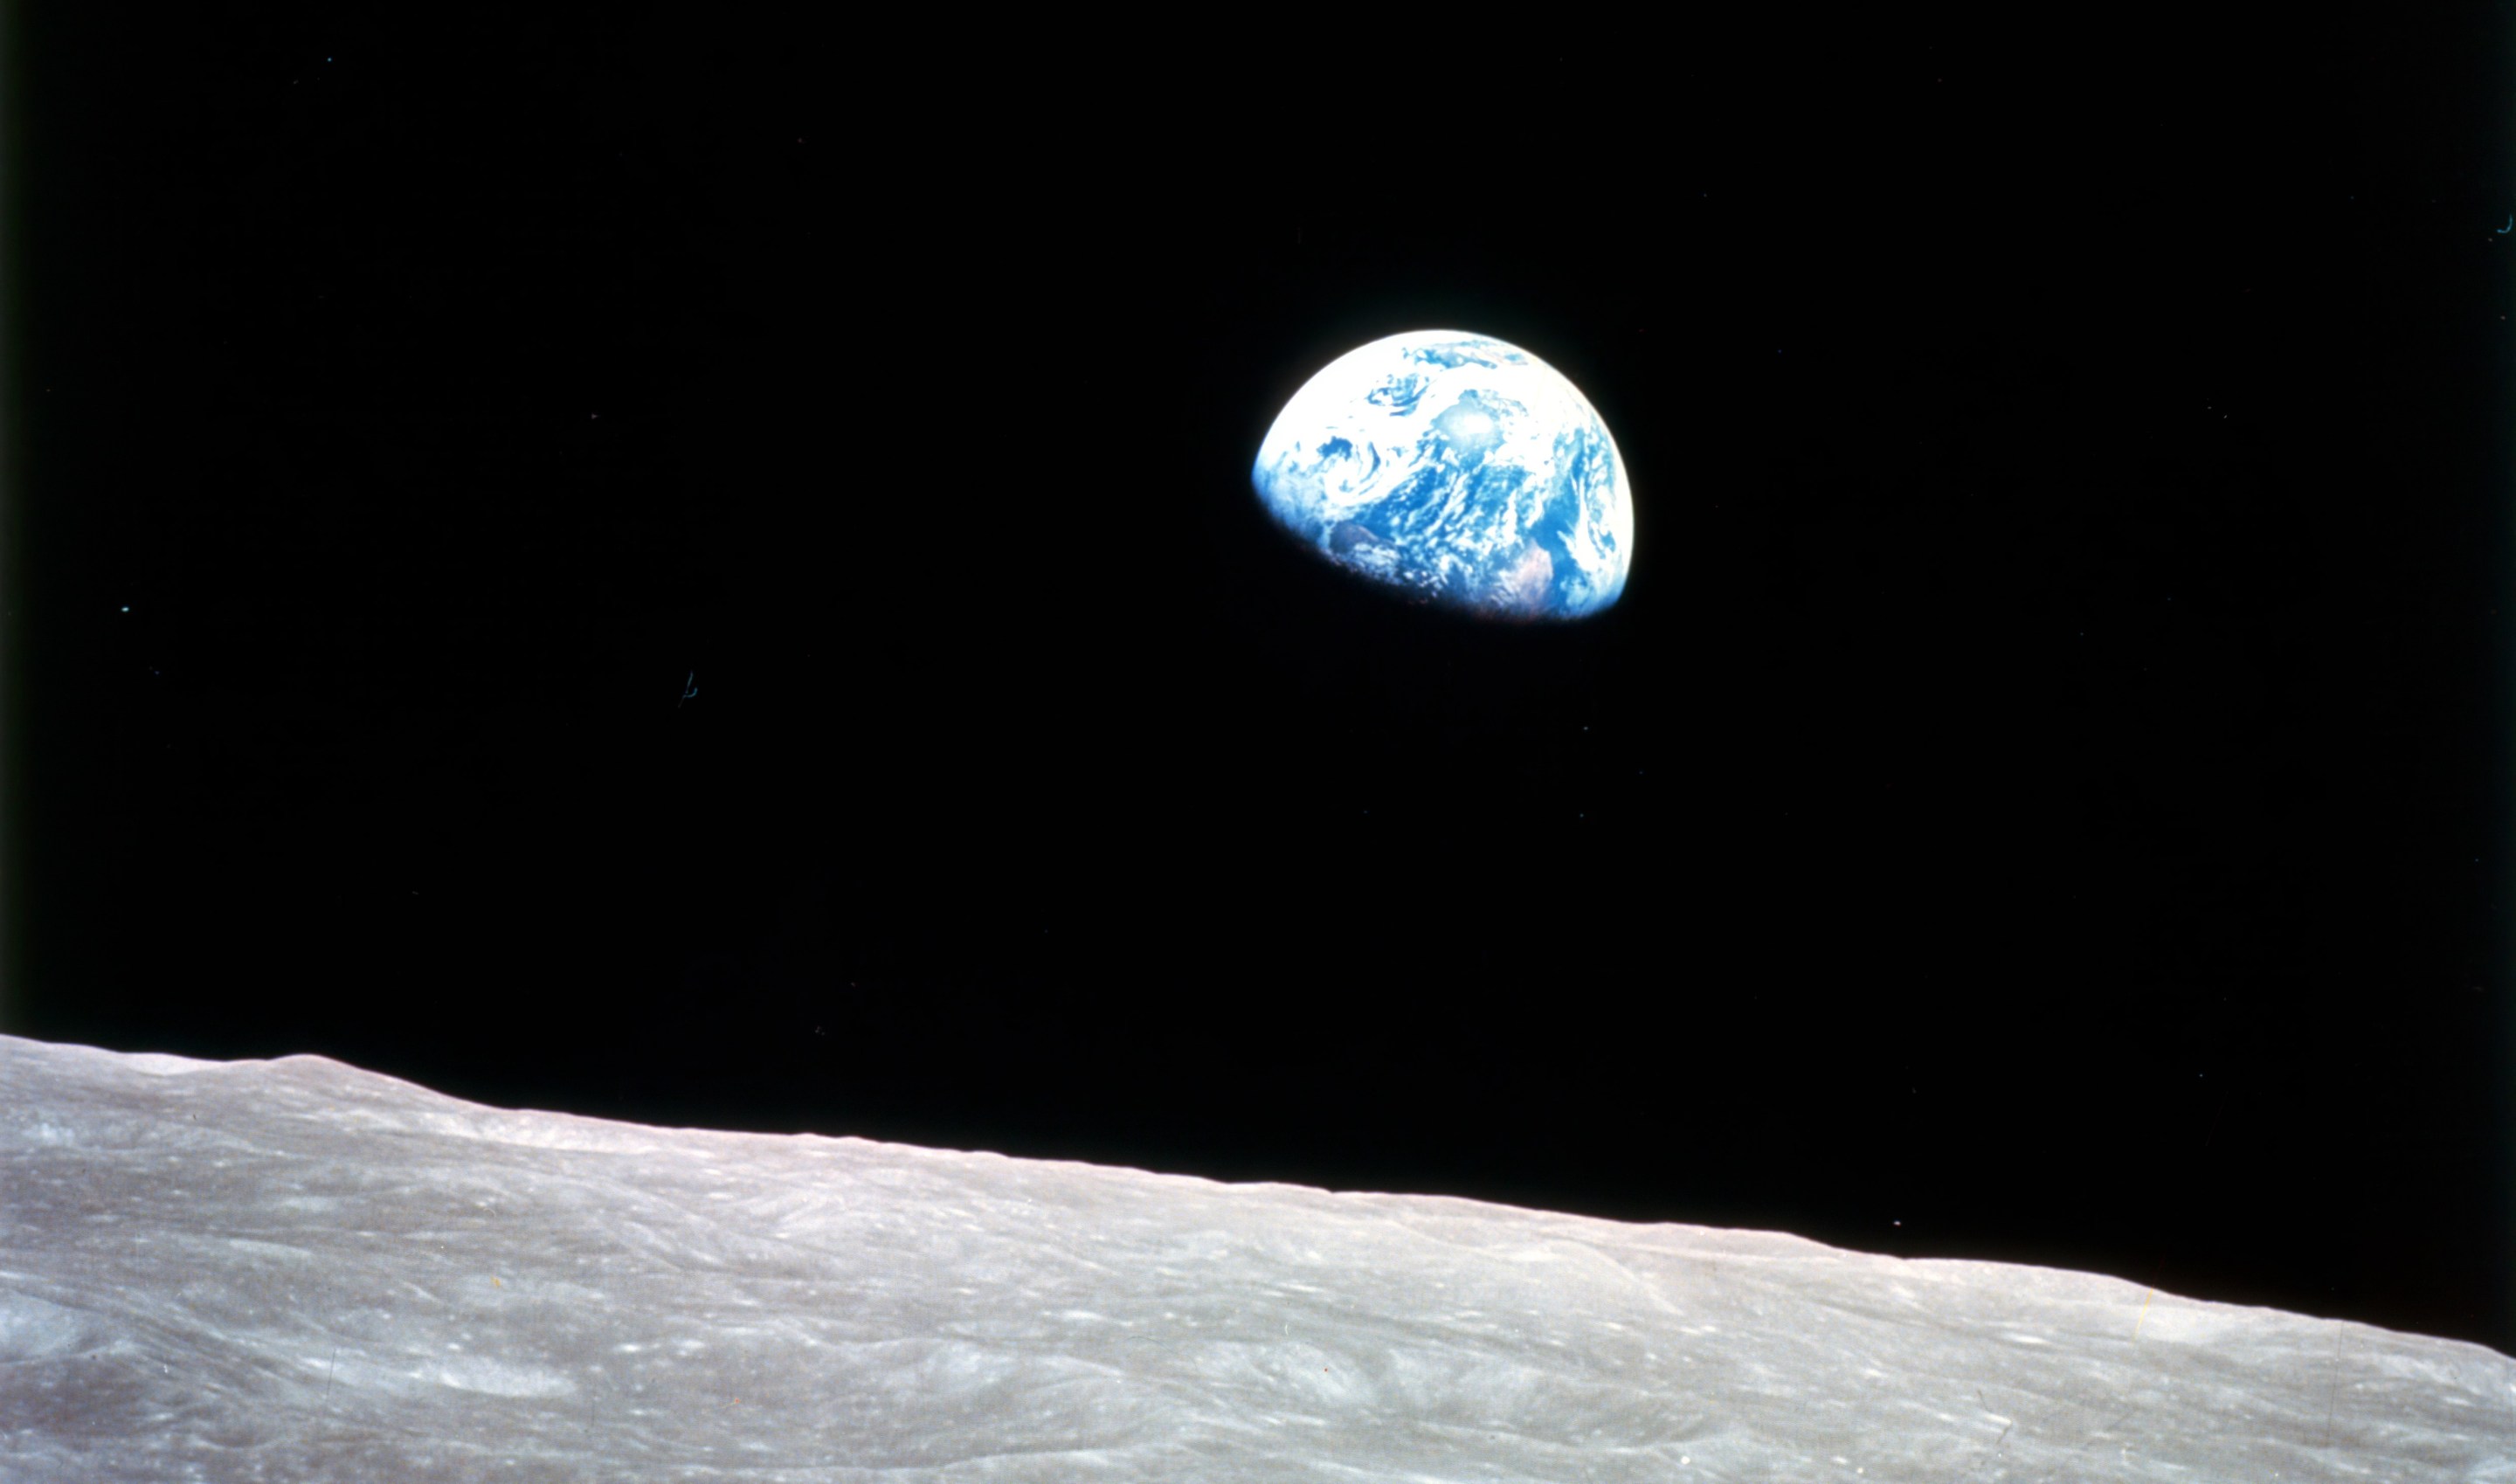 Earthrise - Apollo 8, December 24, 1968. This view of the rising Earth greeted the Apollo 8 astronauts as they came from behind the Moon after the fourth nearside orbit. The photo, by&#xa0;astronaut&#xa0;William Anders, is displayed here in its original orientation, though it is more commonly viewed with the lunar surface at the bottom of the photo. Earth is about five degrees left of the horizon in the photo. The unnamed surface features on the left are near the eastern limb of the Moon as viewed from Earth. The lunar horizon is approximately 780 kilometers from the spacecraft. Height of the photographed area at the lunar horizon is about 175 kilometers.